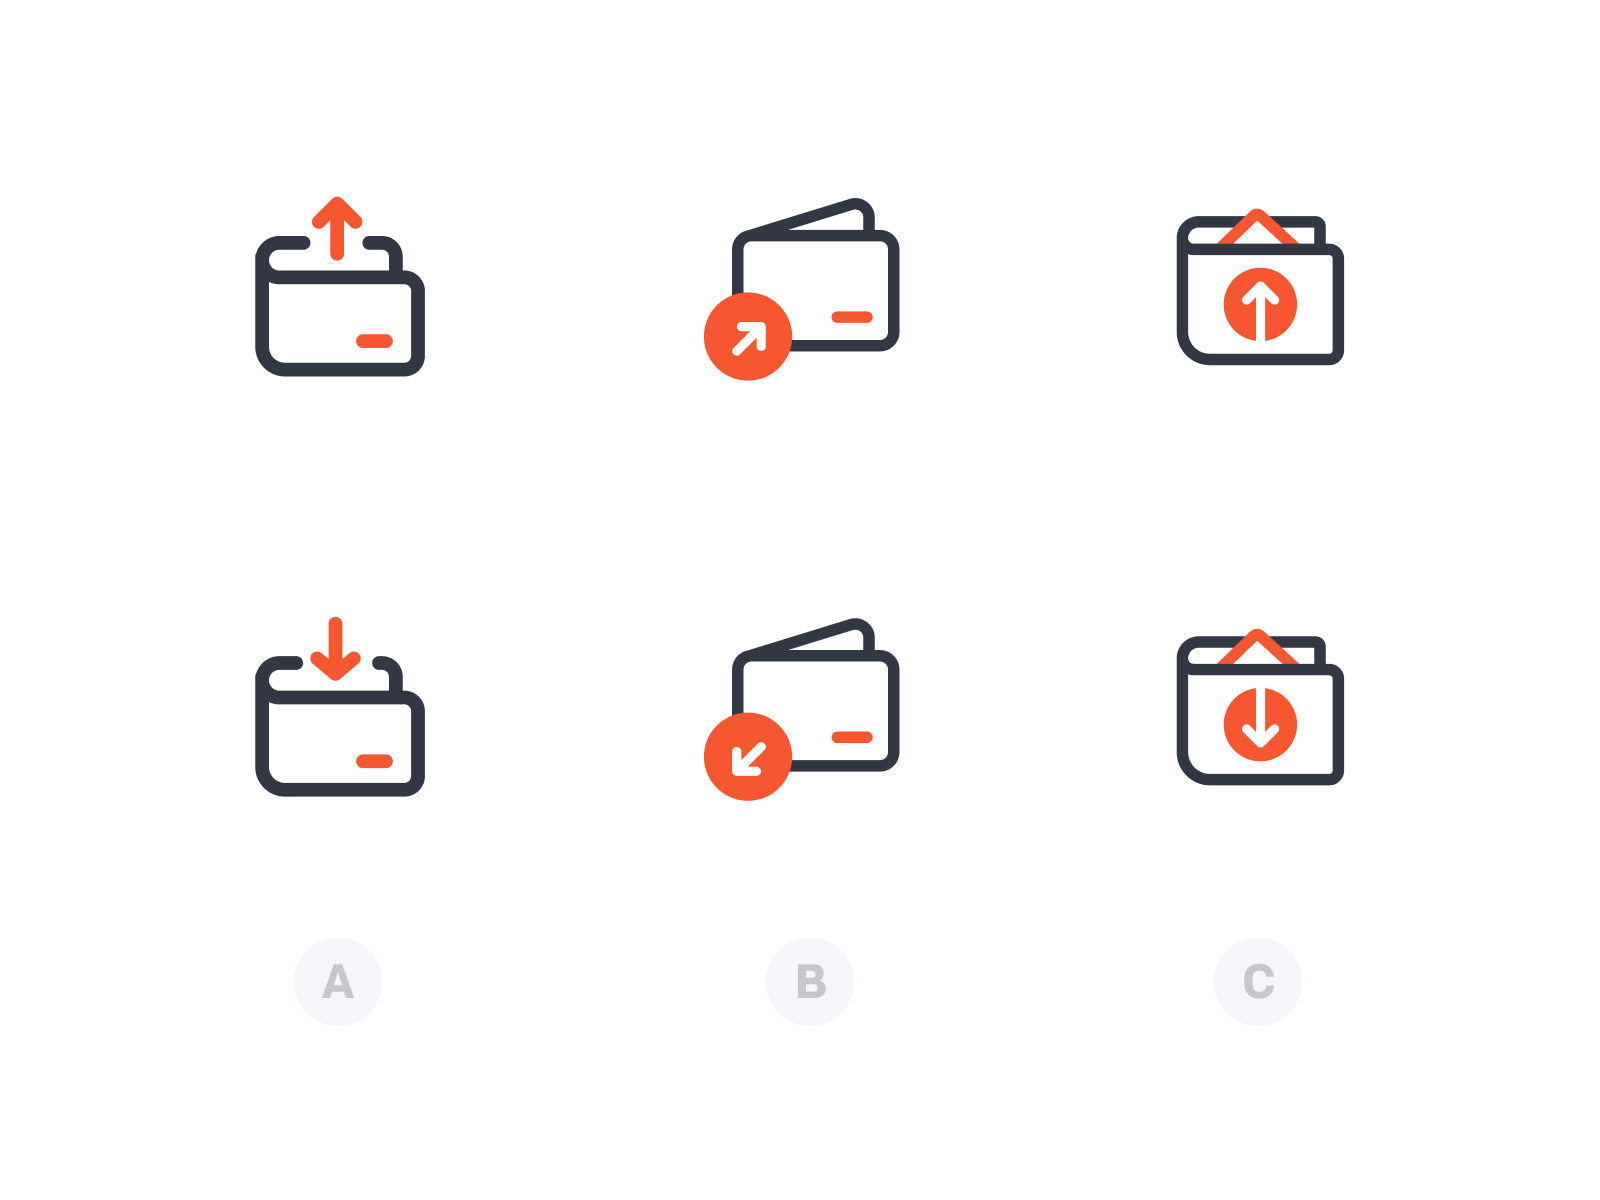 Send & Request Icons by Clint Bustrillos for Abstract Digital on Dribbble